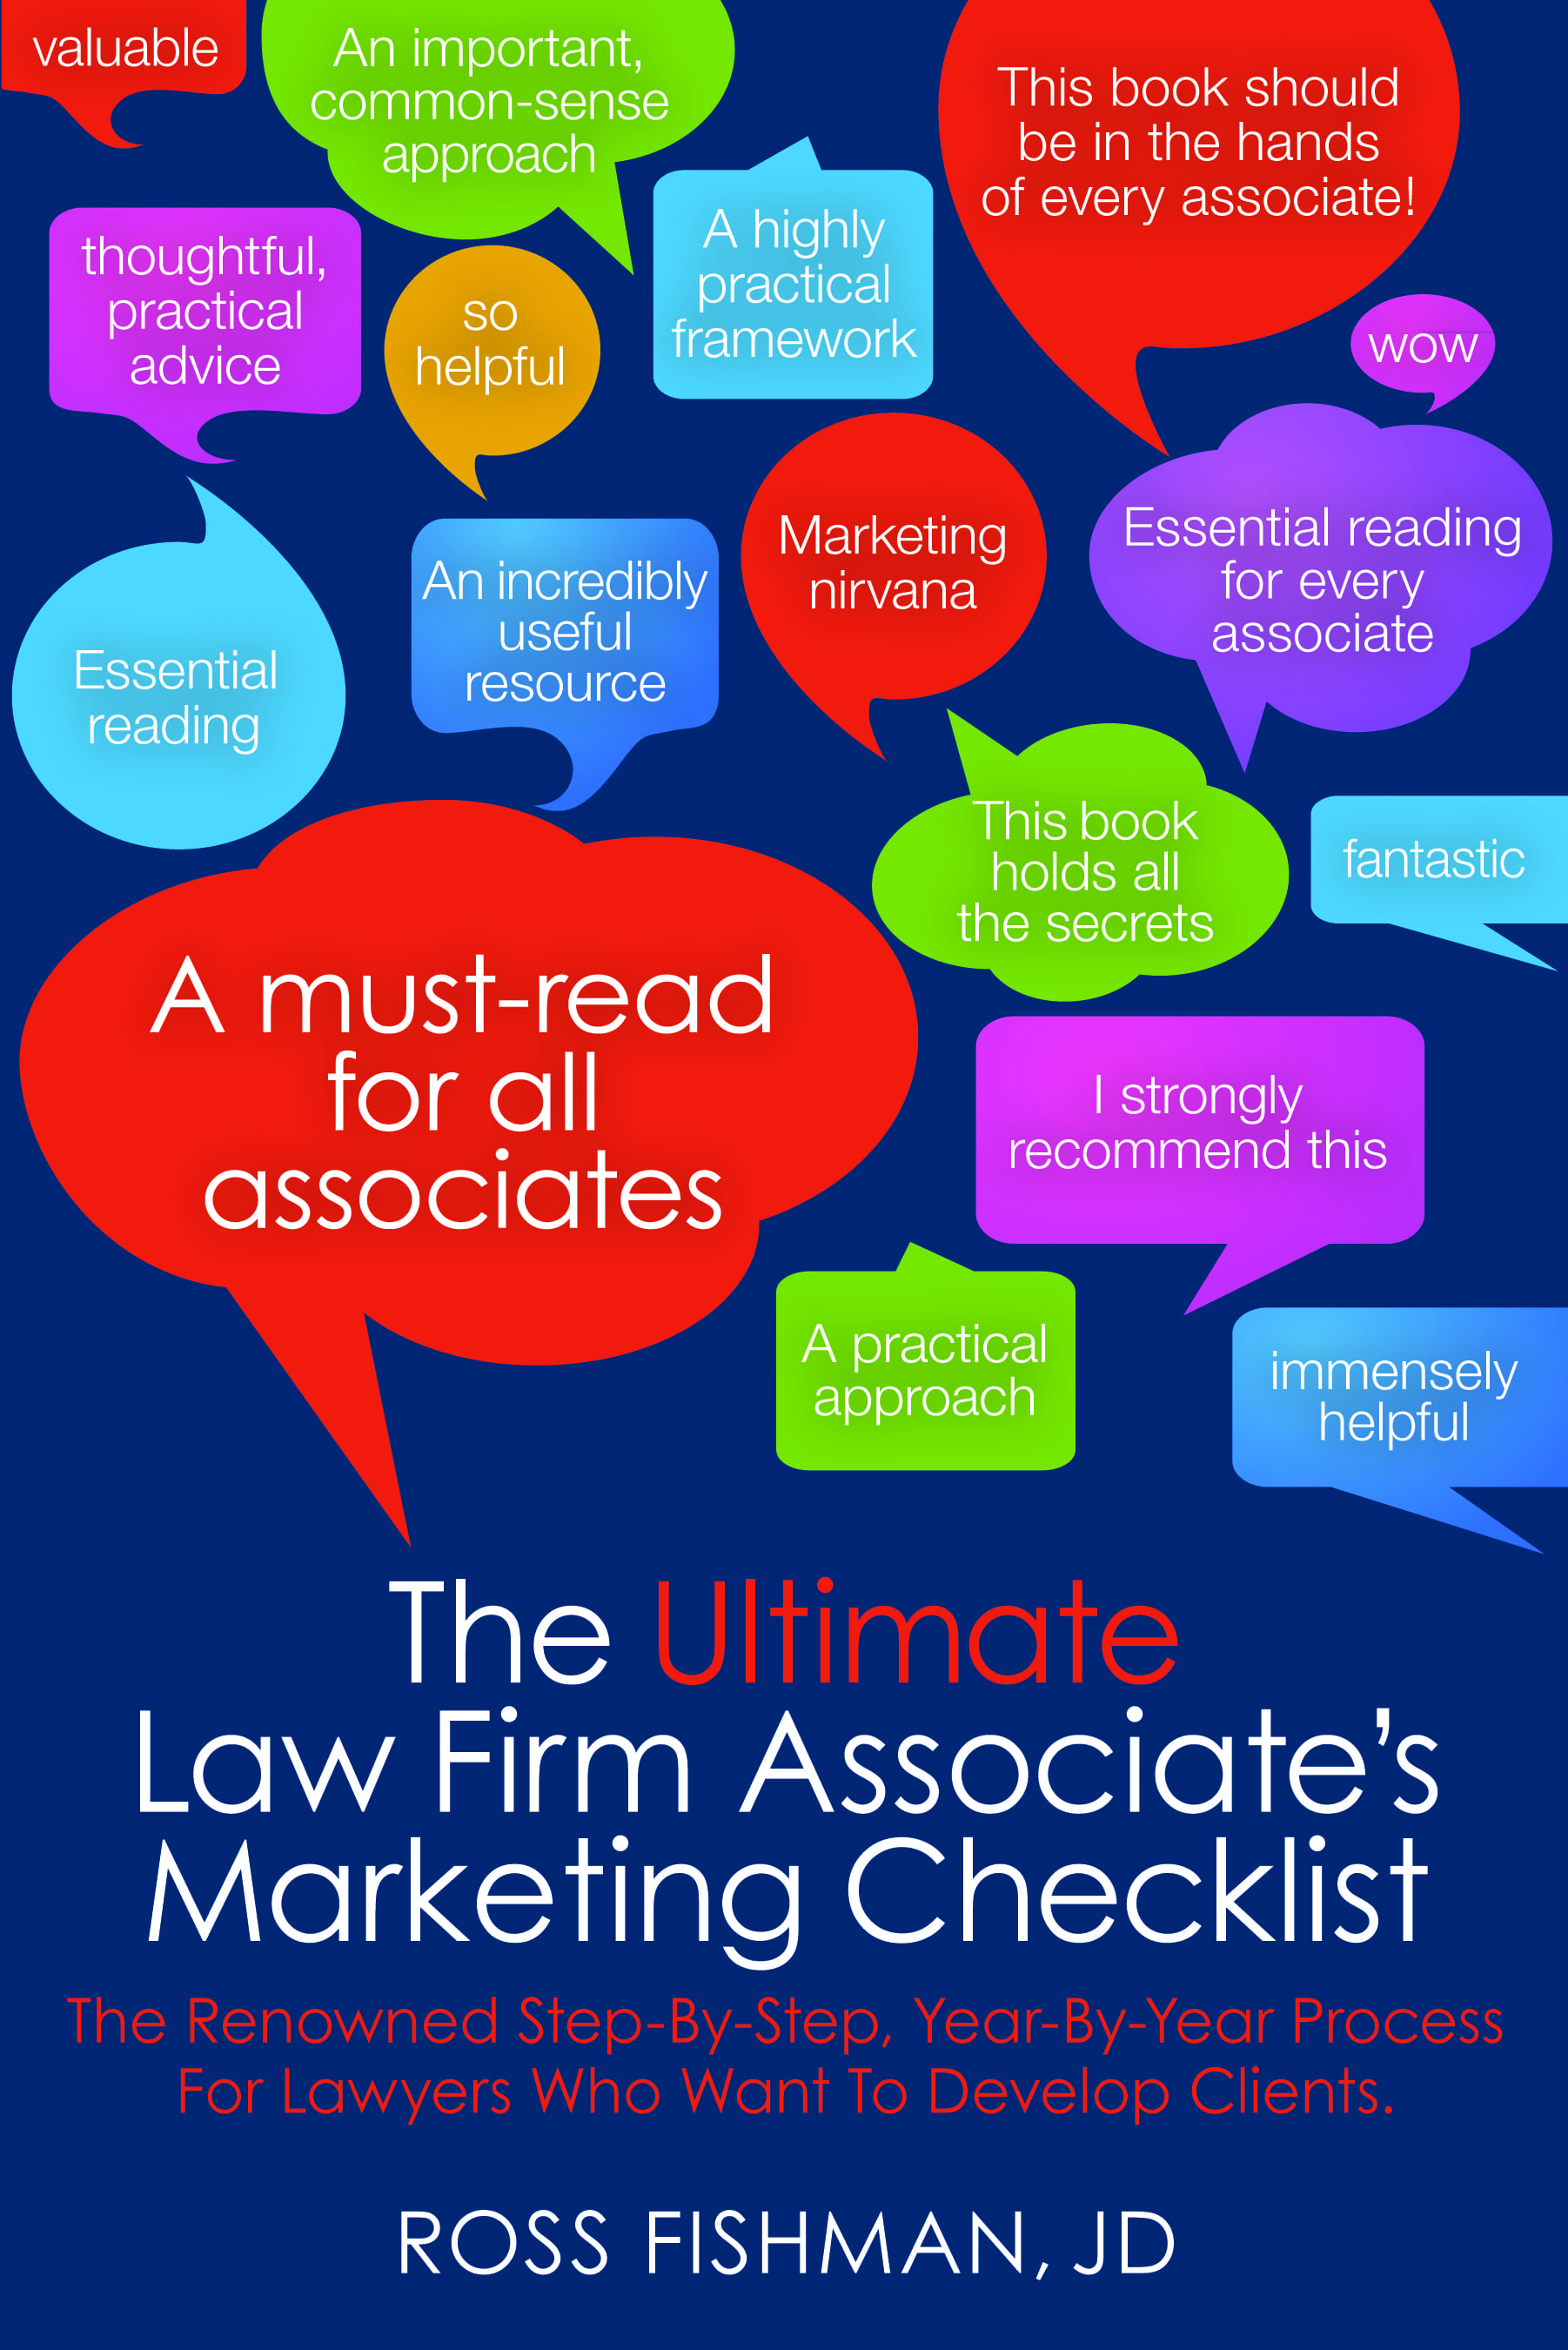 Free Sample of our “Ultimate Law Firm Associate’s Marketing Checklist” book.